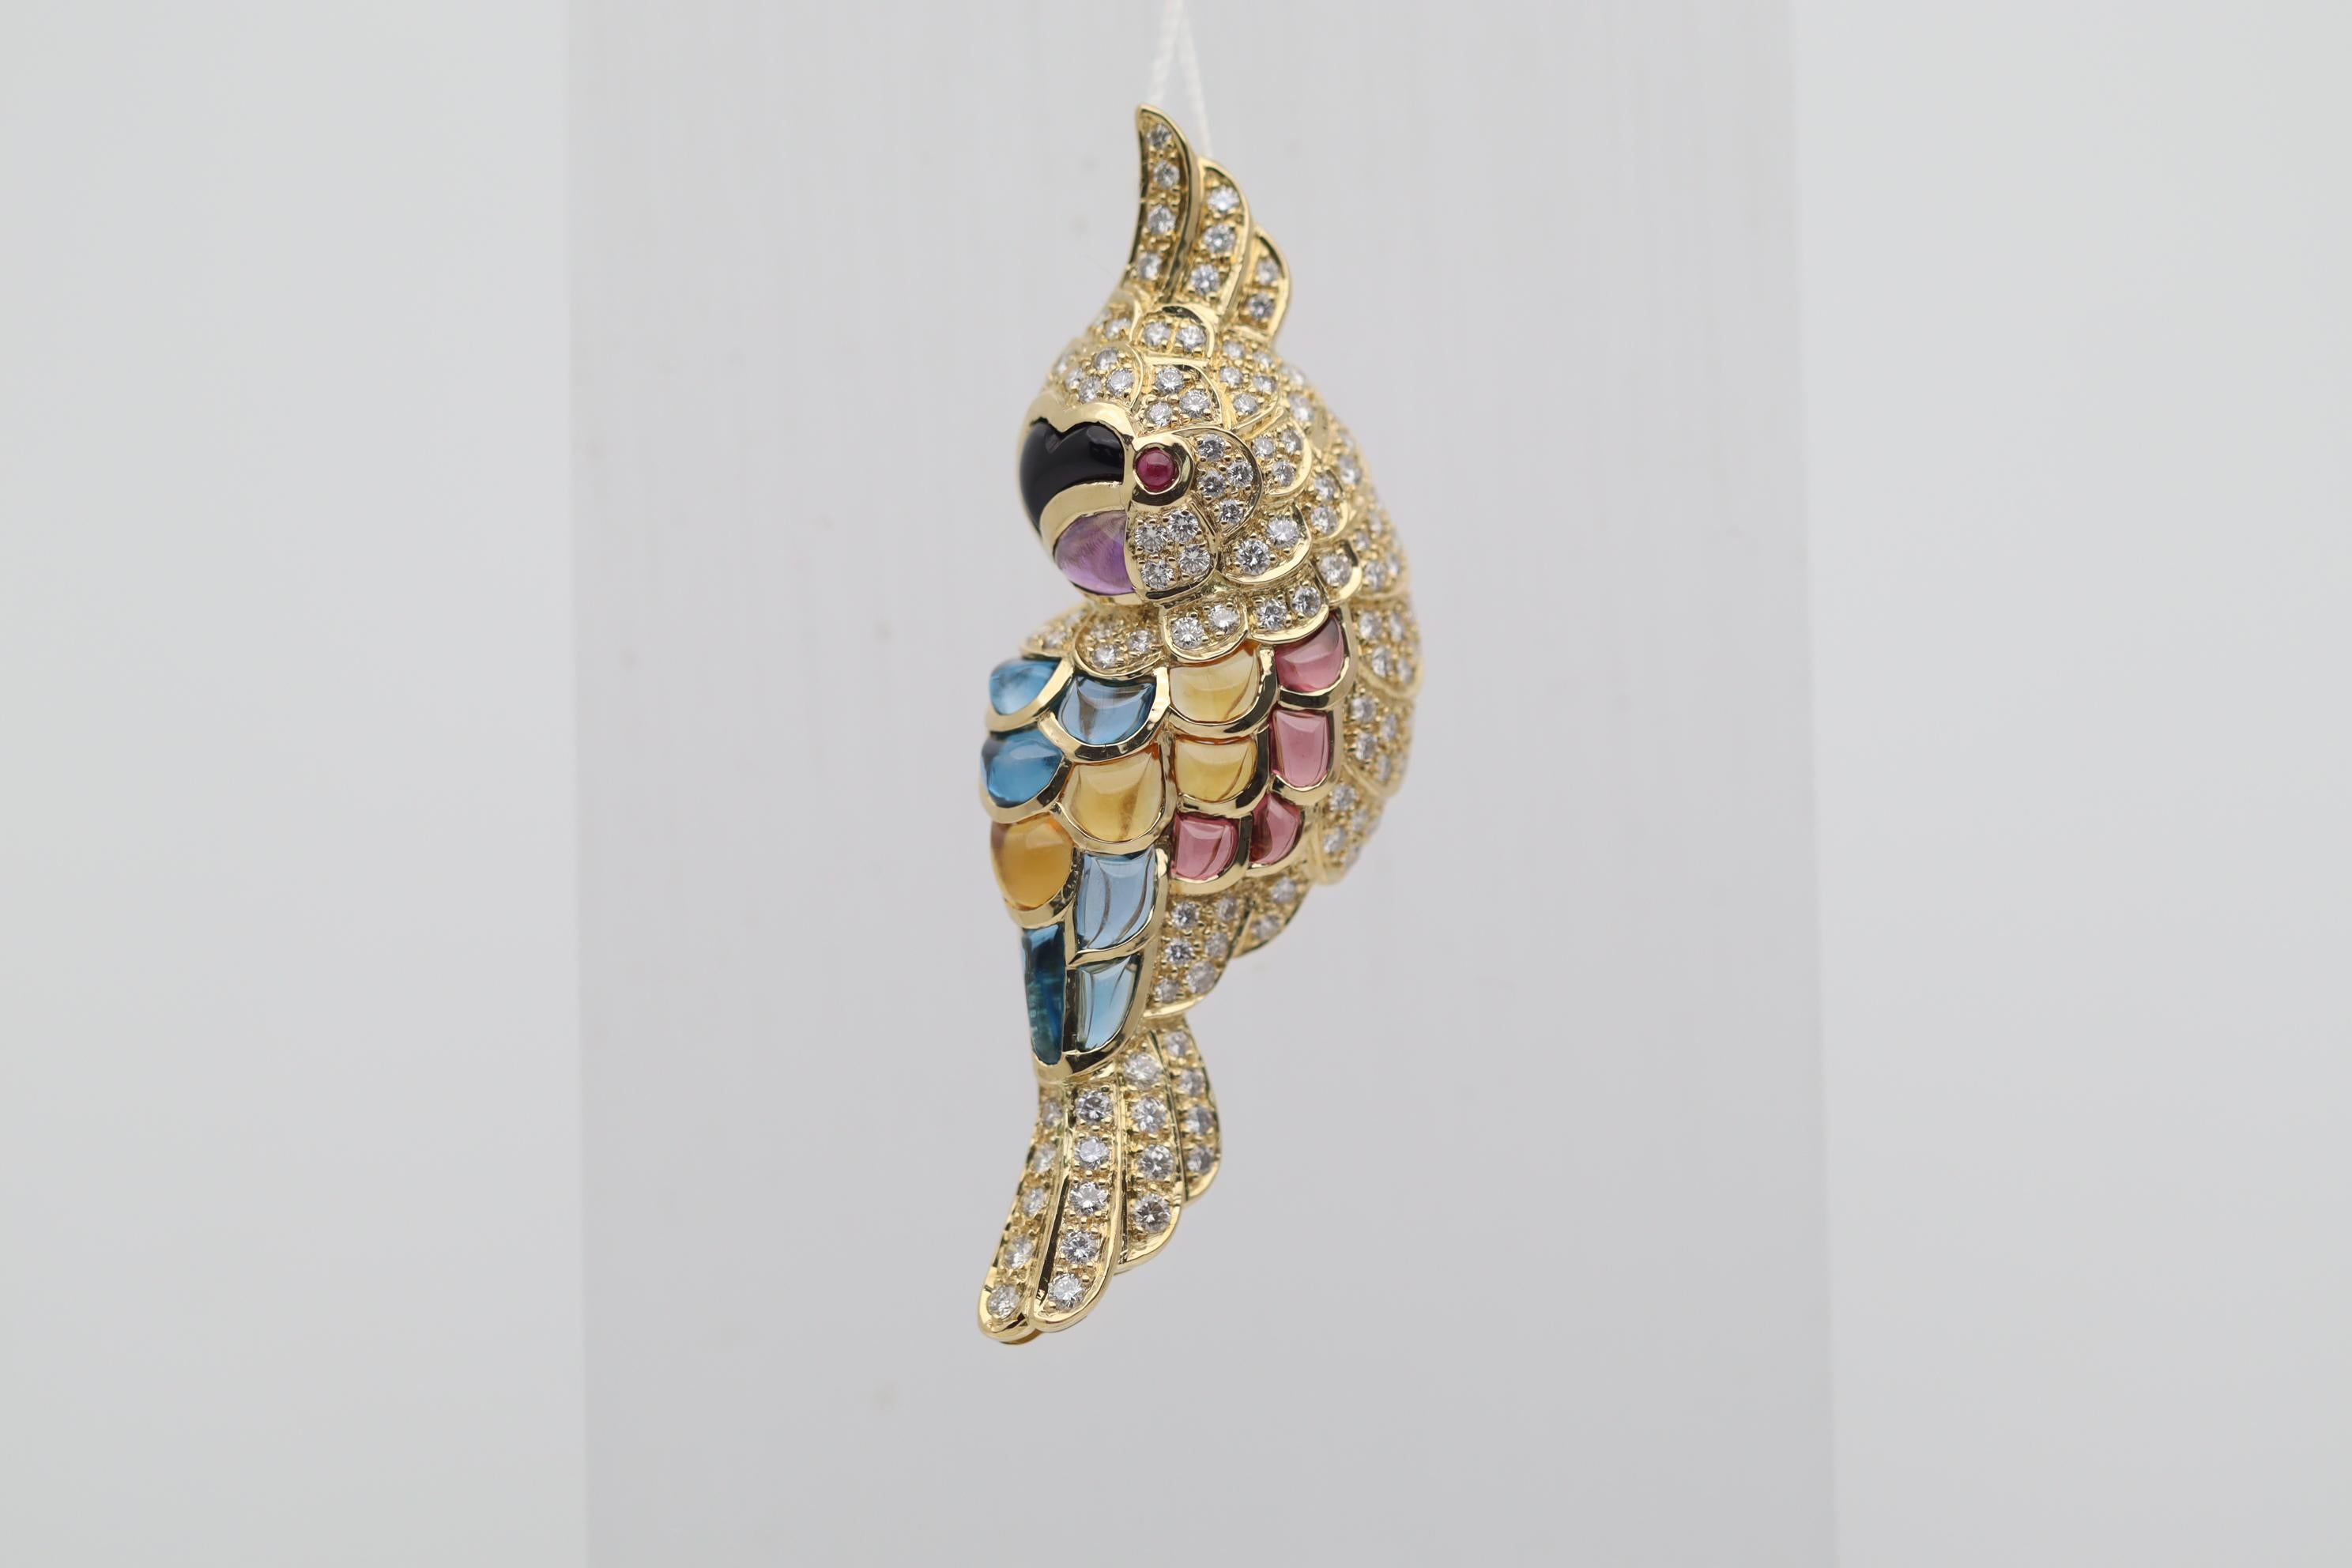 A sweet and elegant toucan studded with diamonds and colored gemstones takes center stage! The beautiful bird features 1.32 carats of round brilliant-cut diamonds which adds brilliance and sparkle to the piece, along with multi-colored gemstones